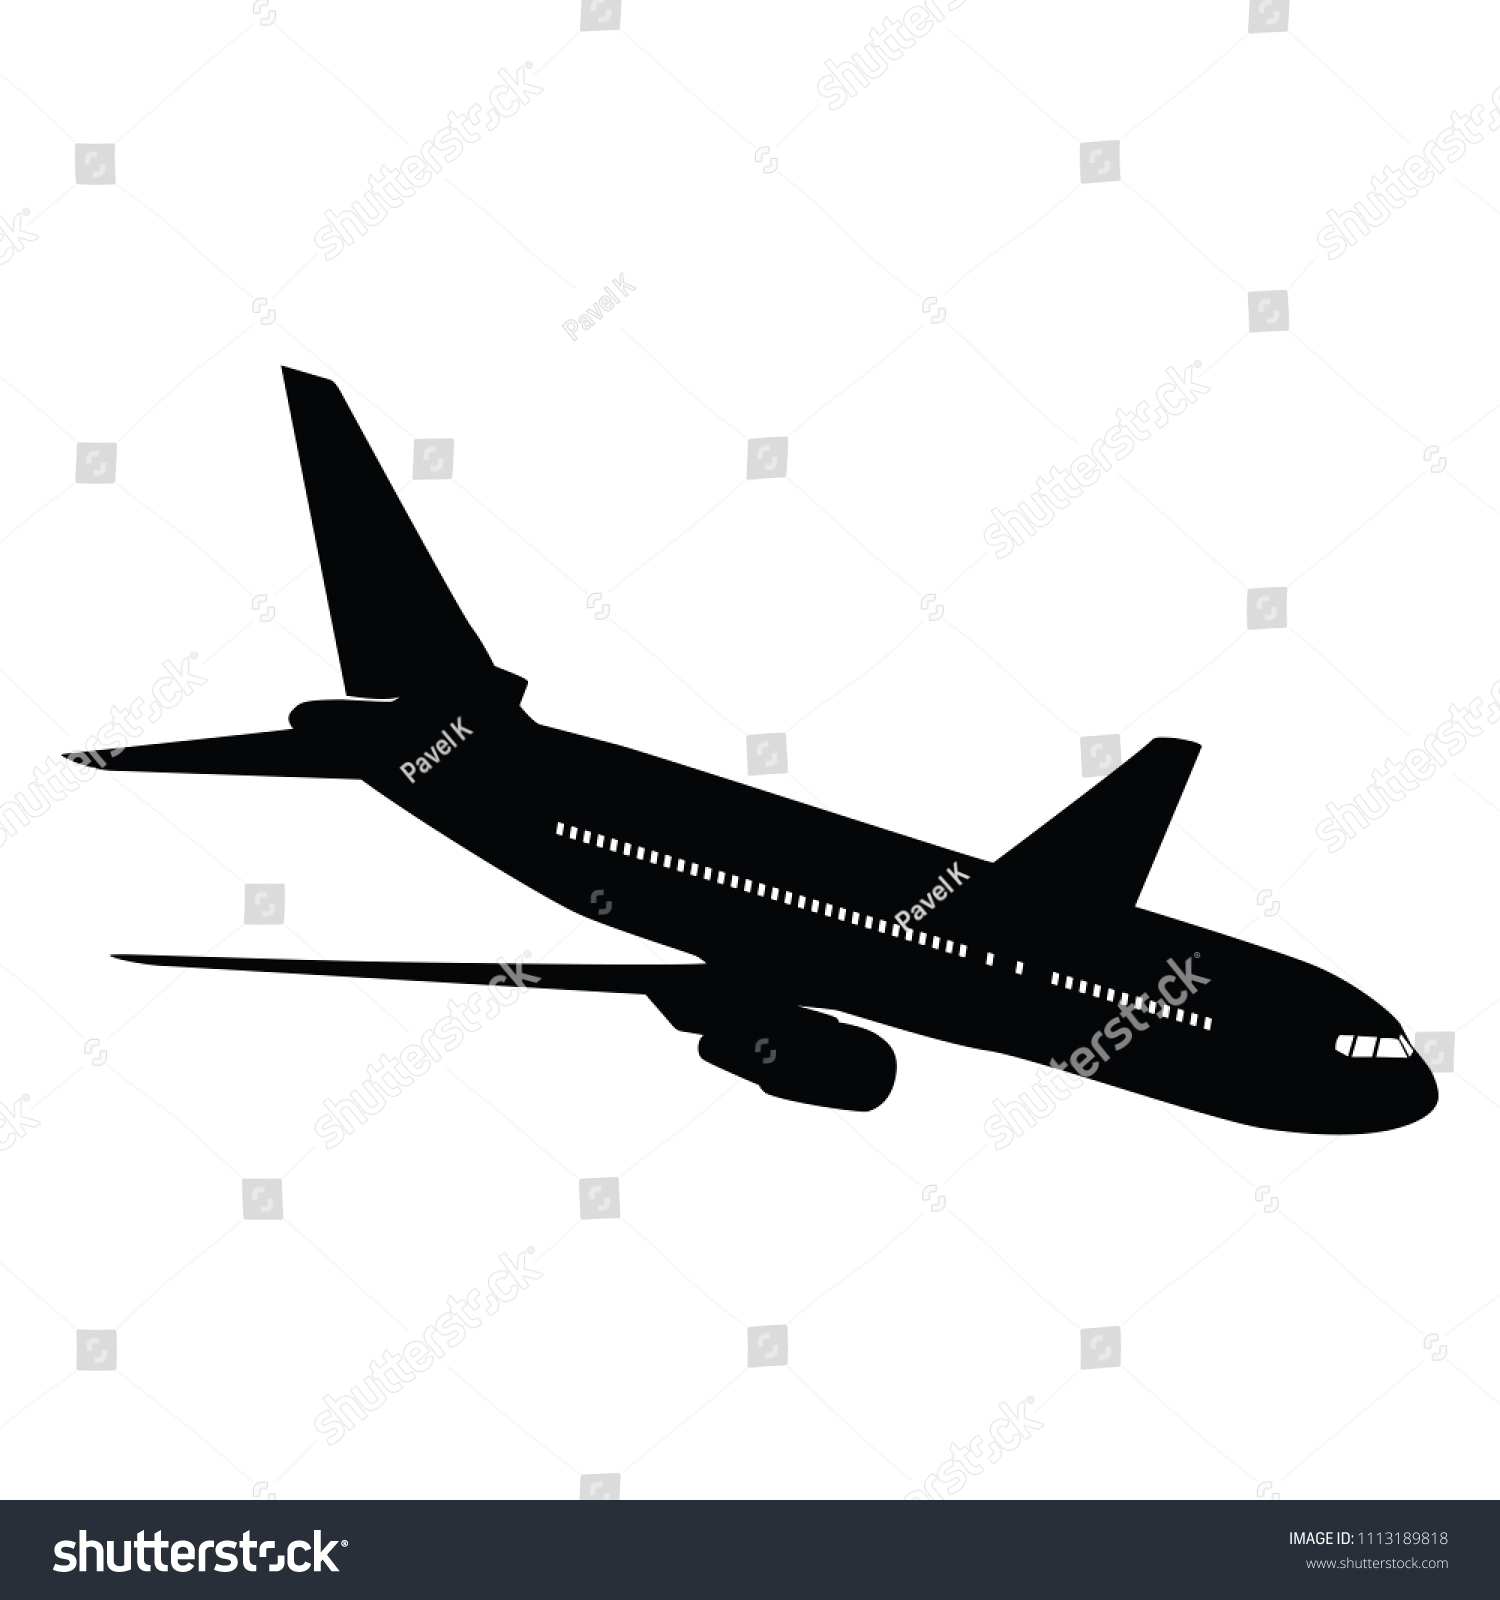 SVG of Airplane silhouette on white background. Vector illustration. svg